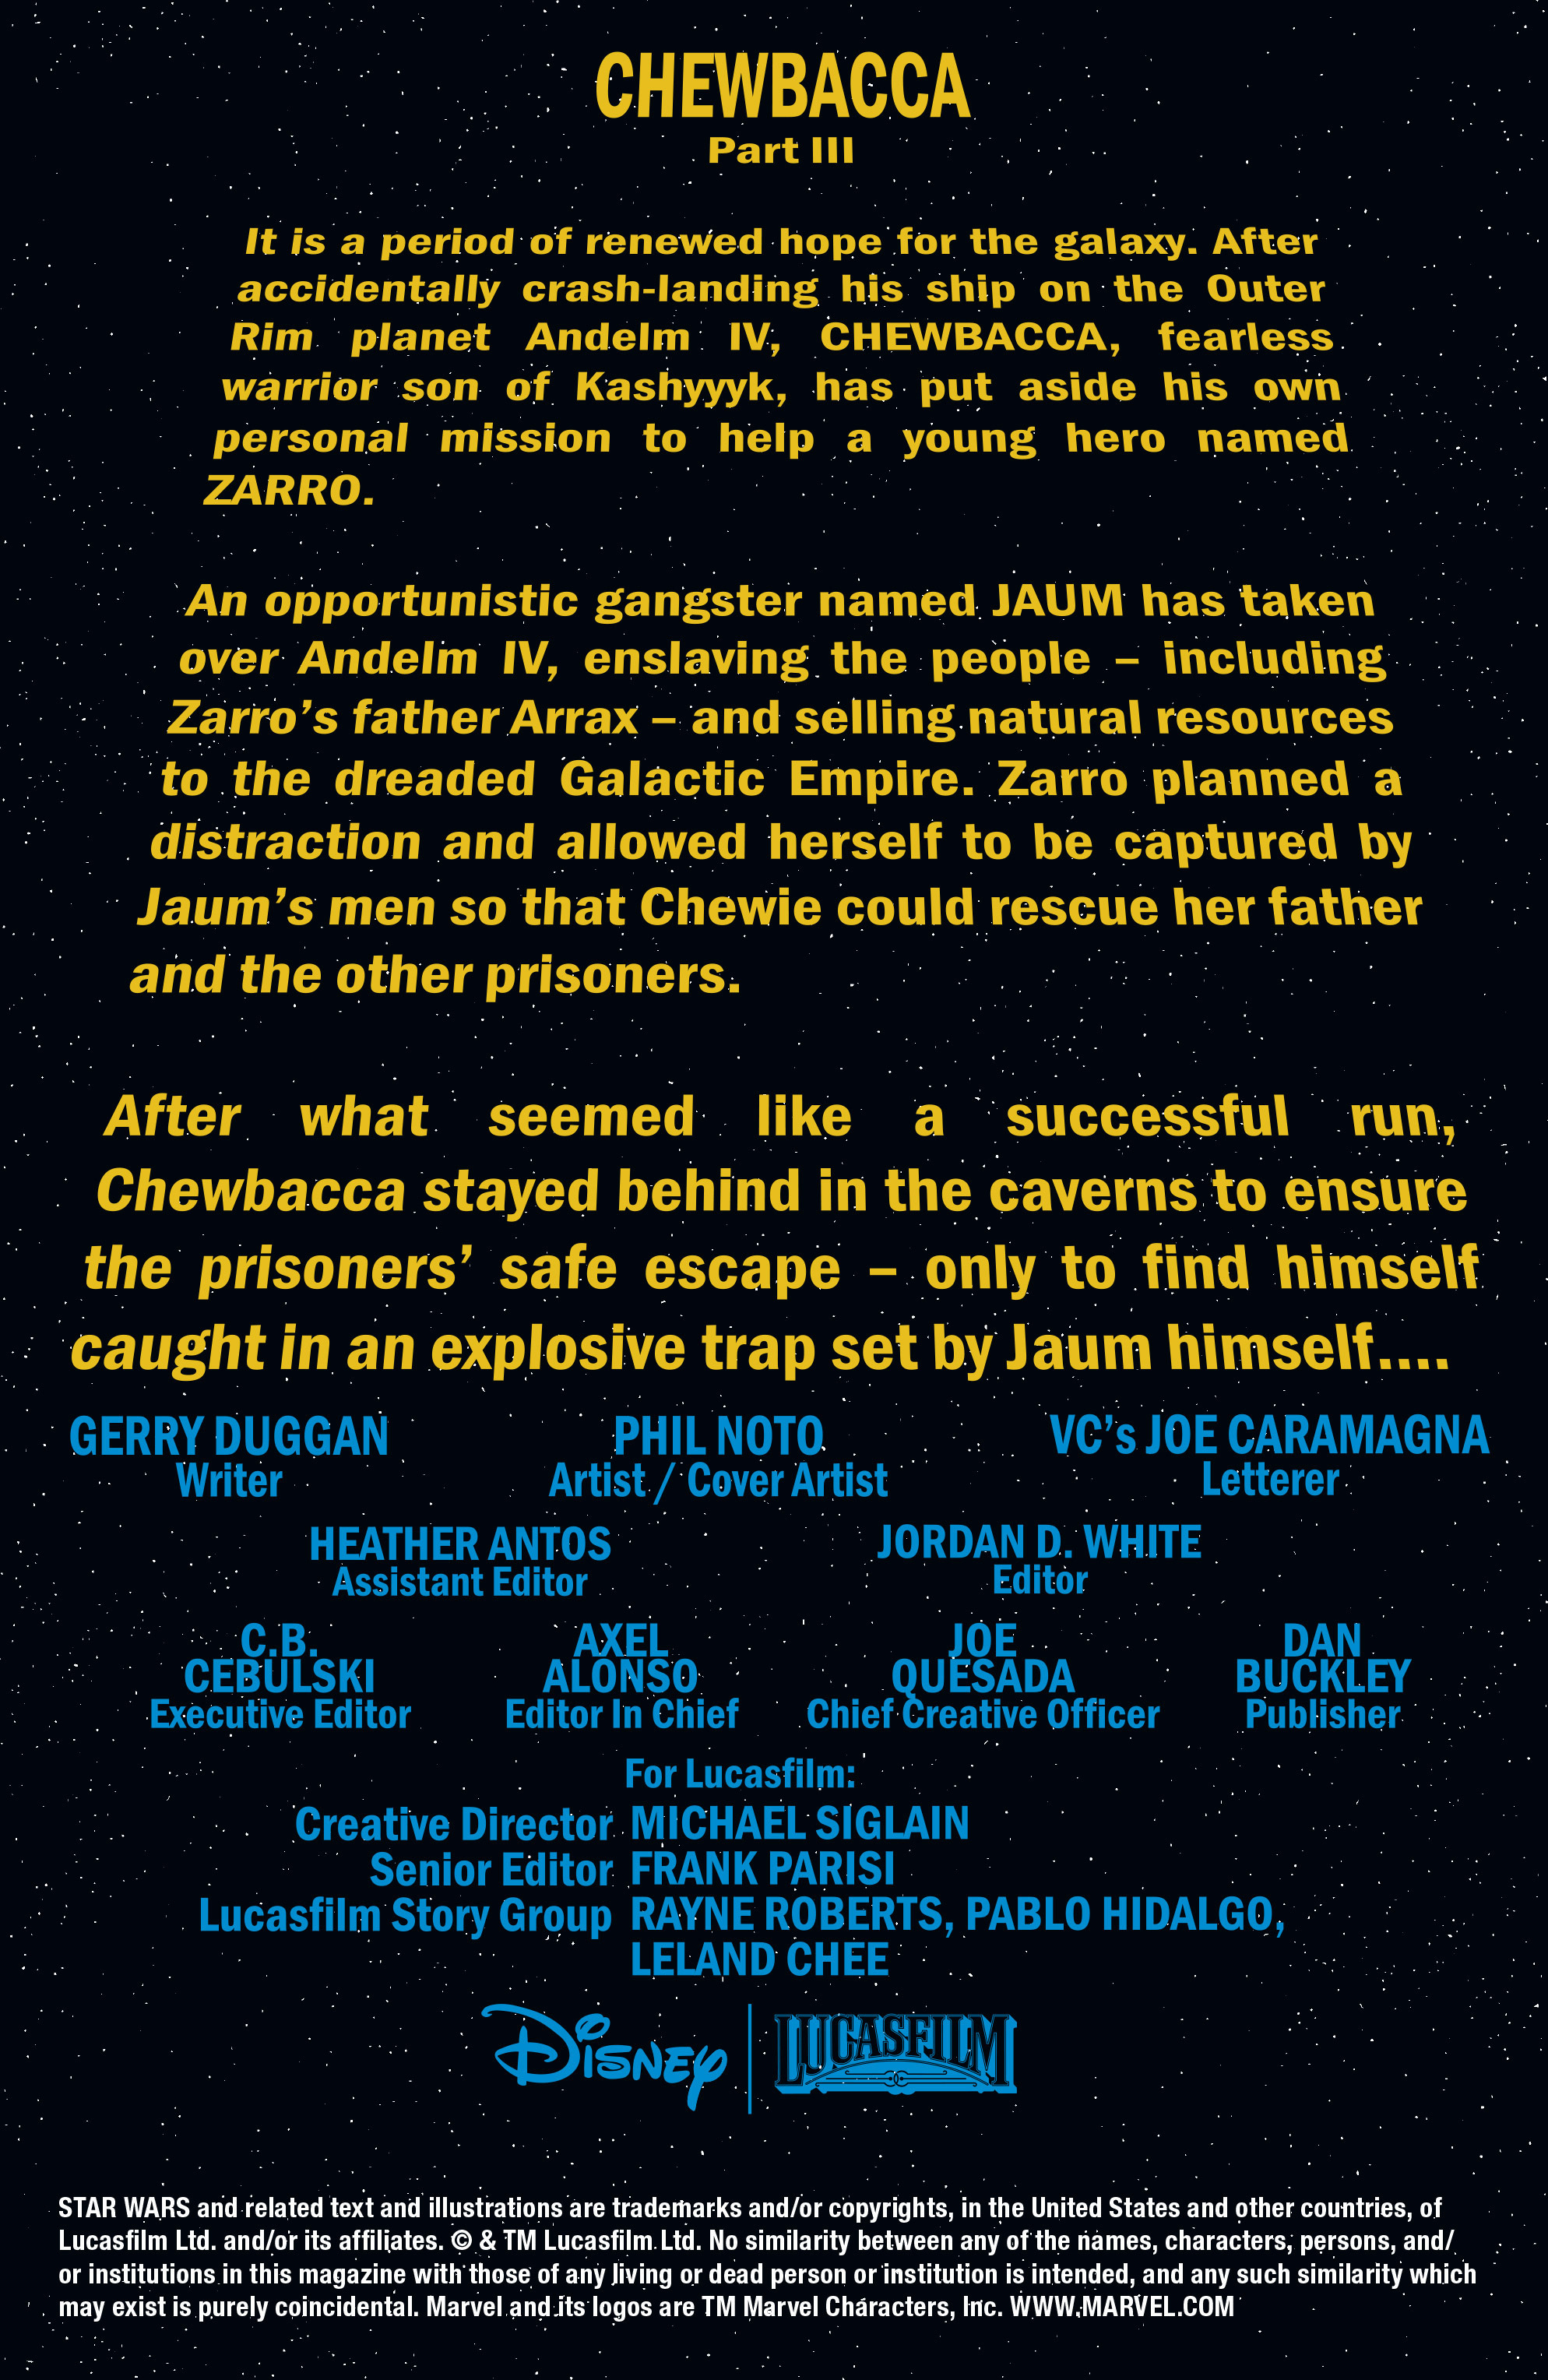 Read online Chewbacca comic -  Issue #3 - 2